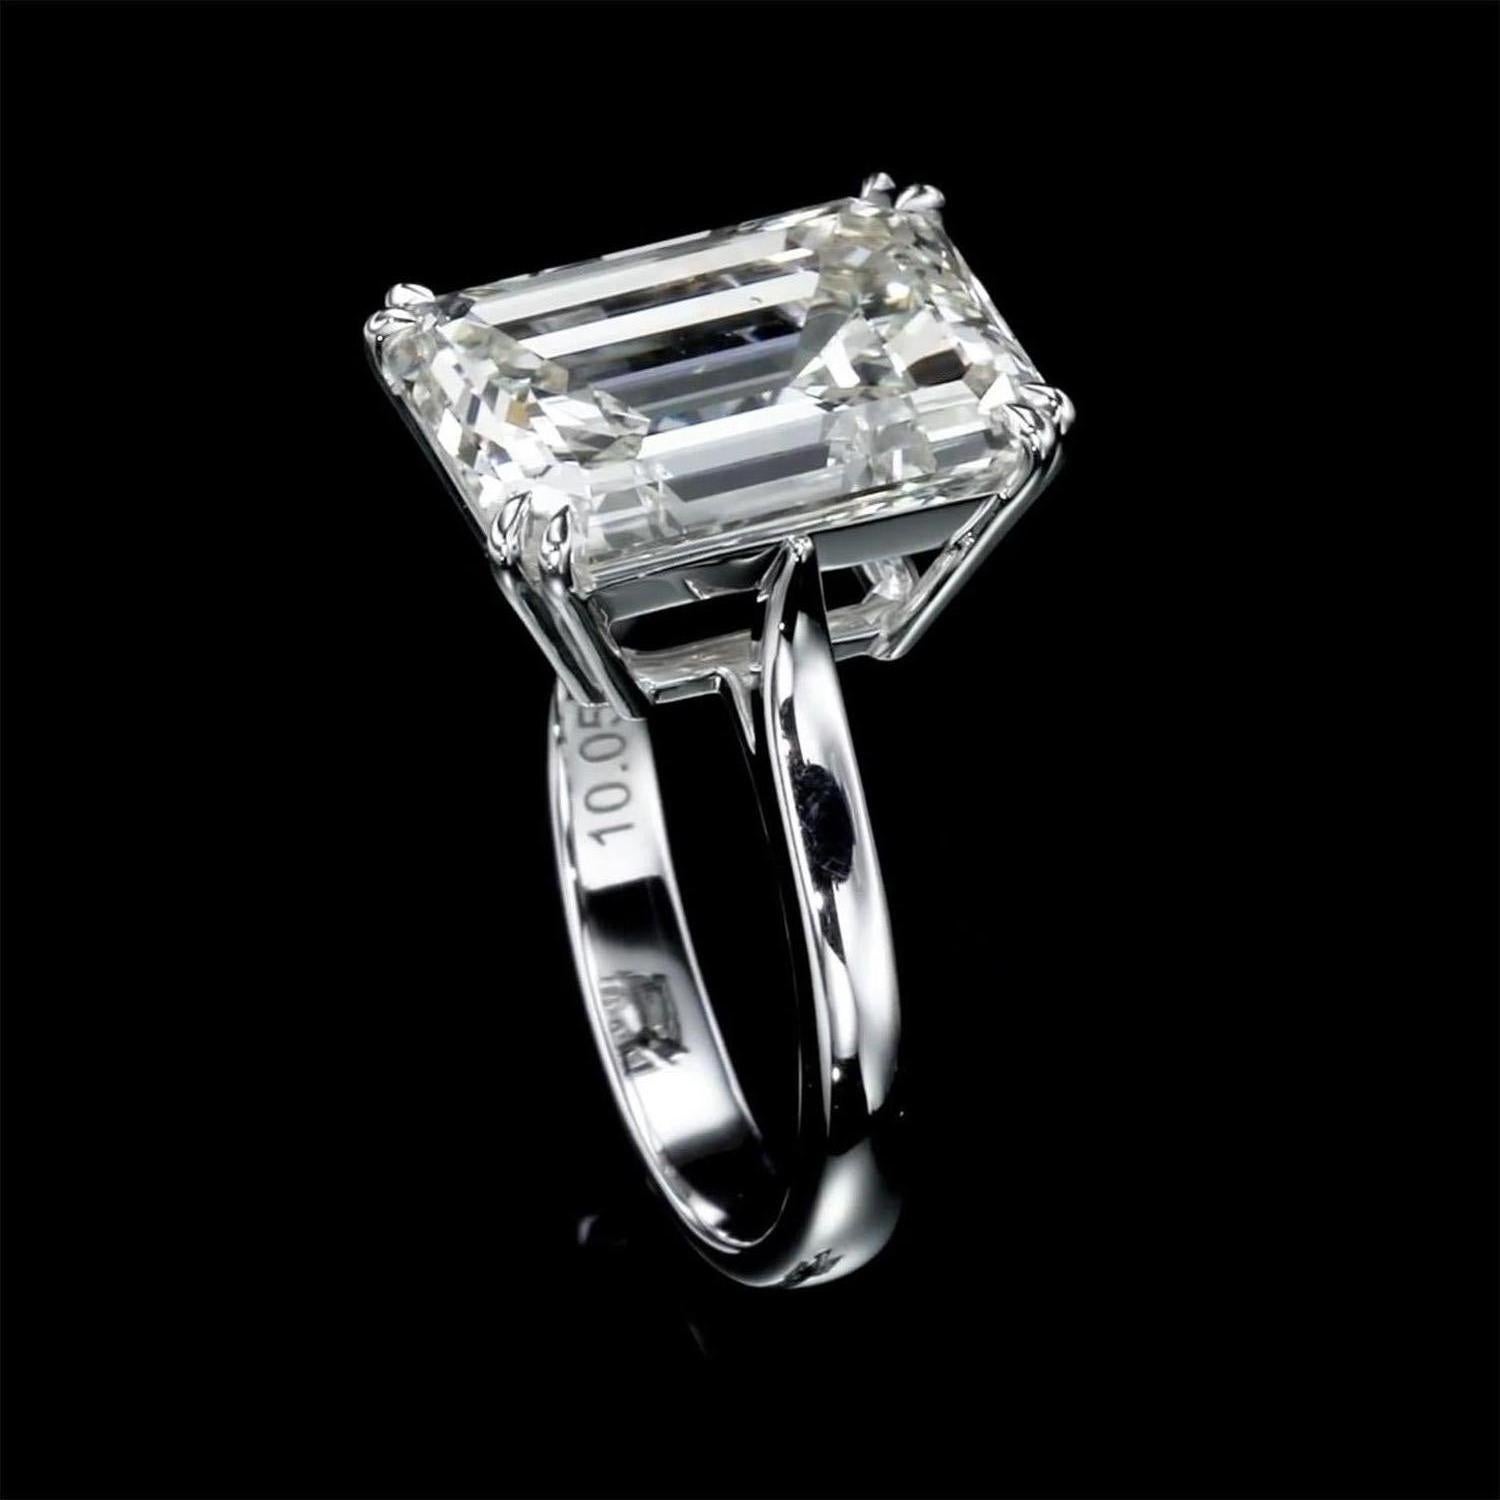 Women's 10.05 Carat Natural Diamond Ring Emerald Cut Color L Clarity SI1 For Sale